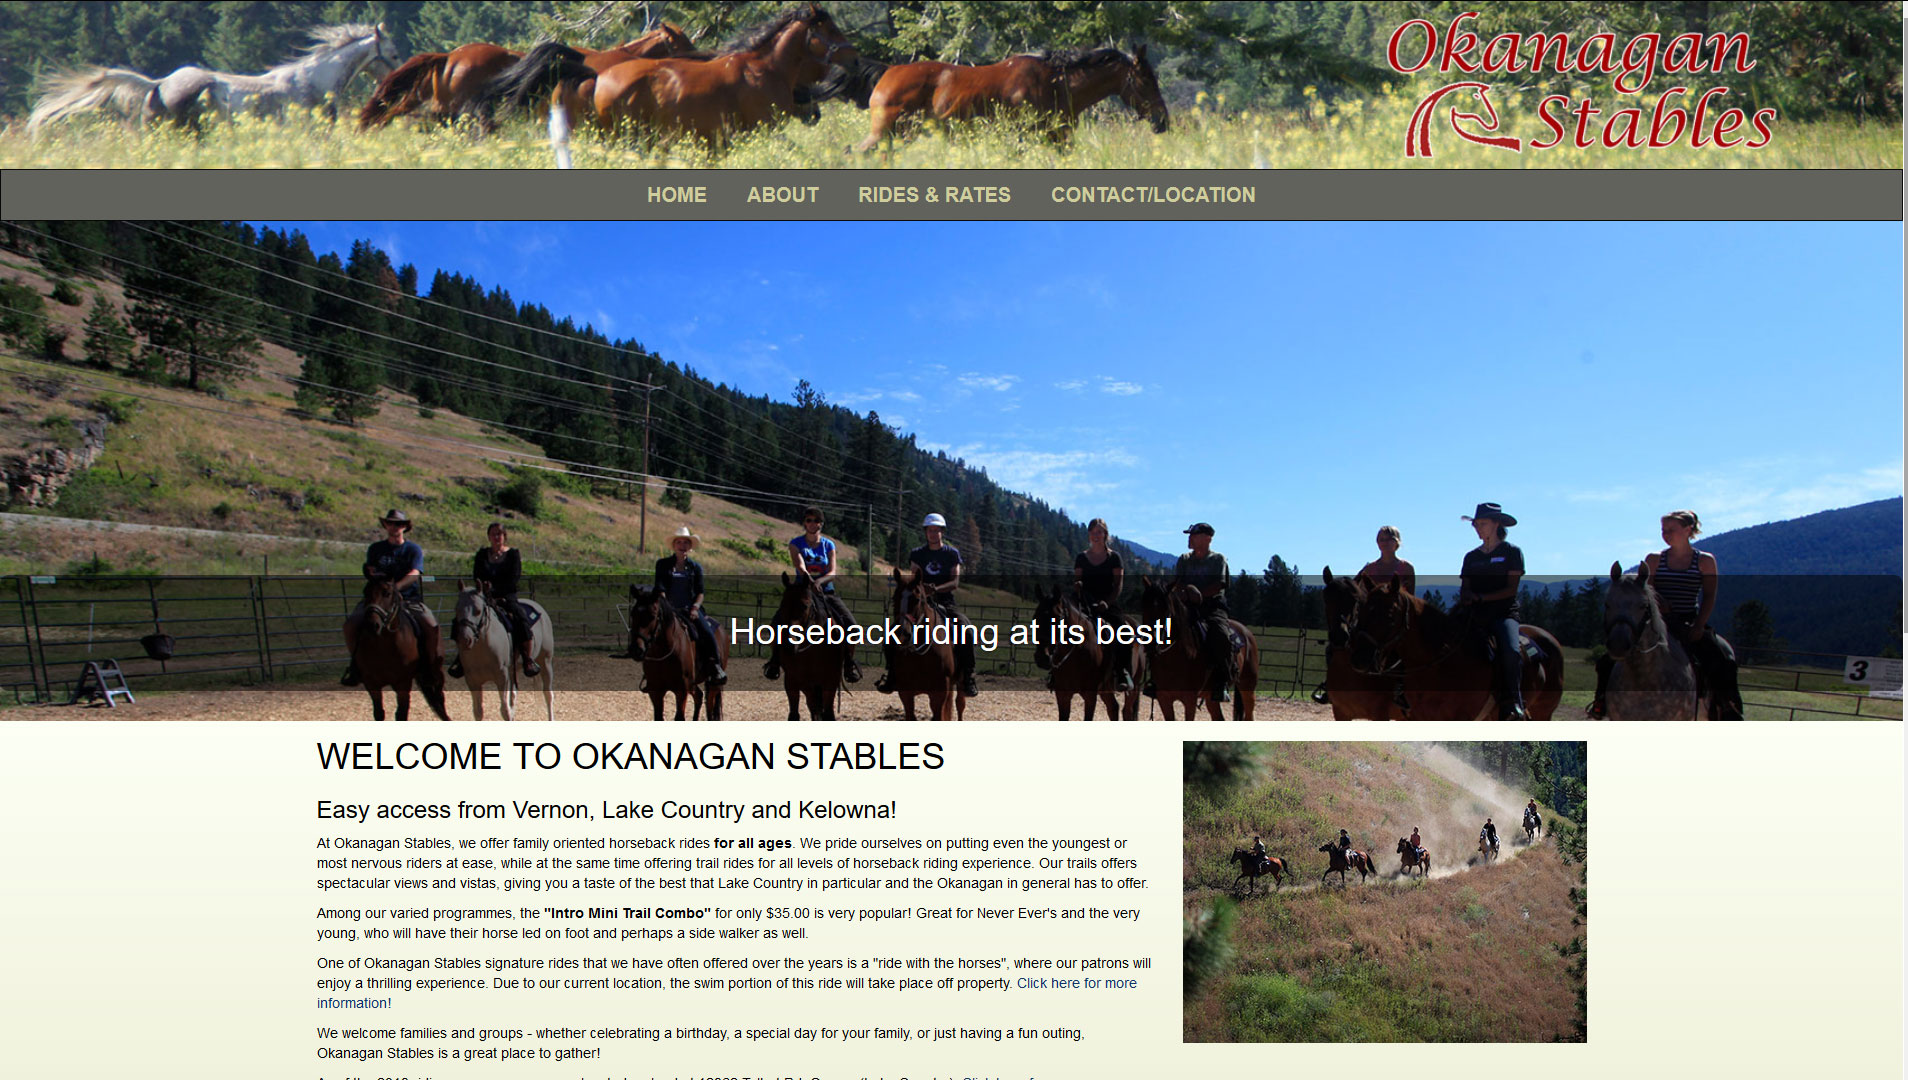 Okanagan Stables is now in a new location as of July 2014